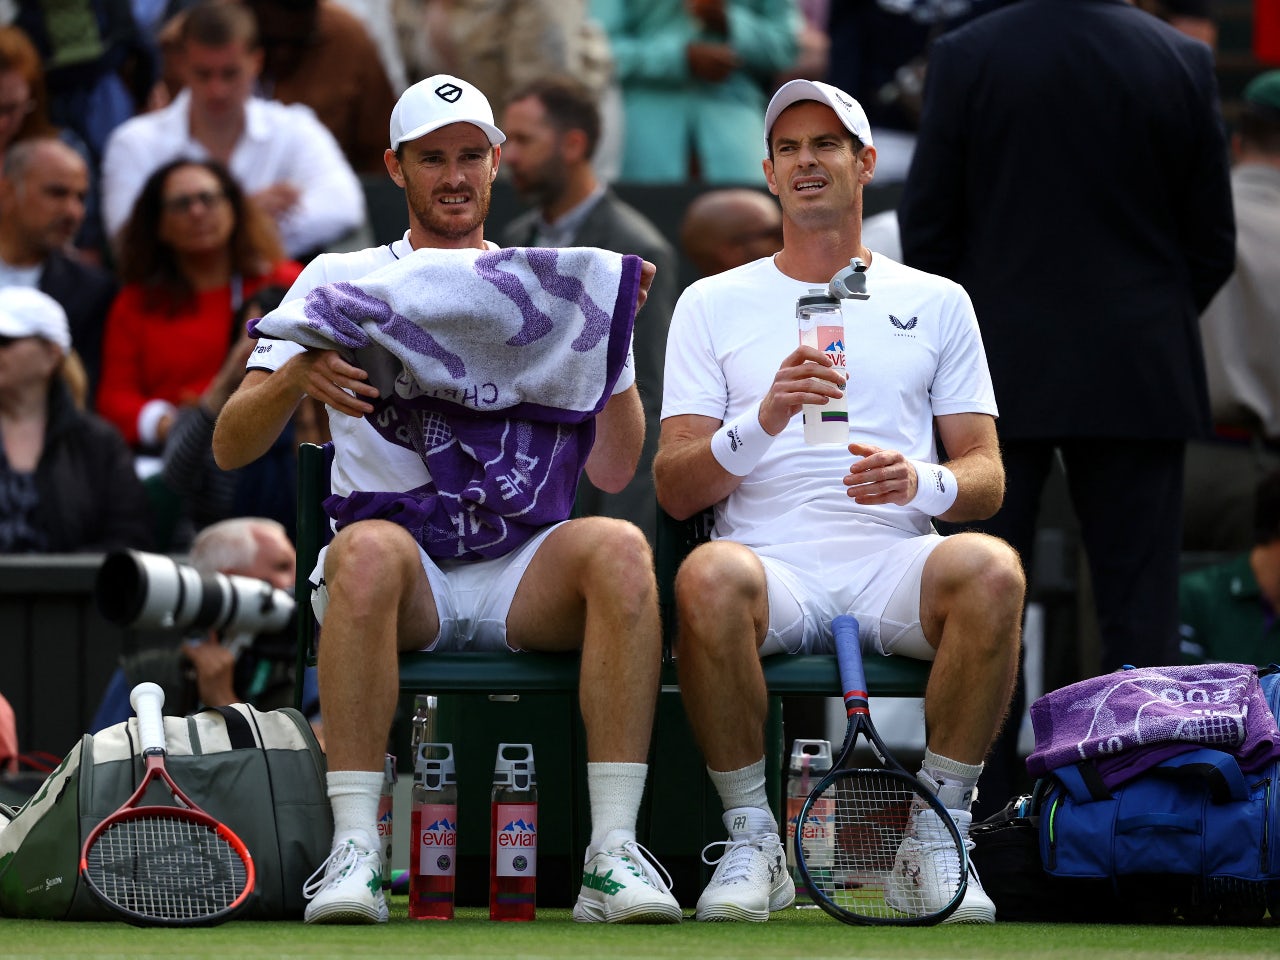 Andy Murray's Wimbledon swansong starts on sour note with men's doubles exit